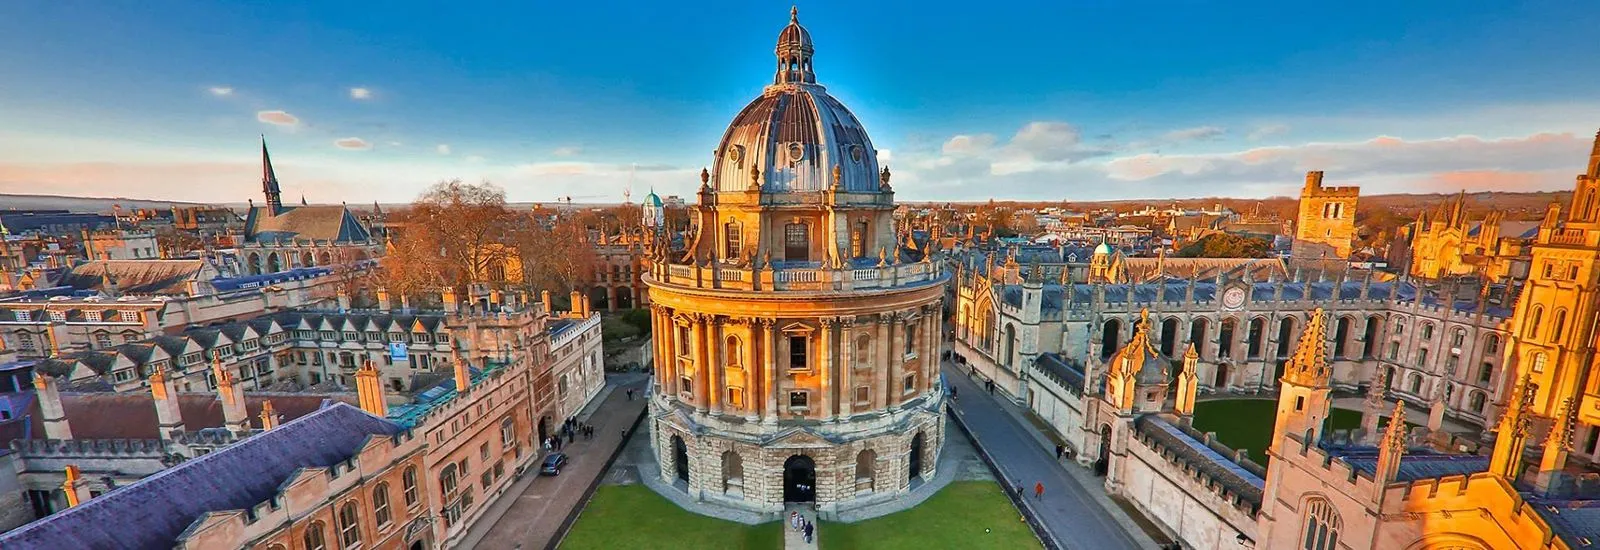 Oxford University A World Leader in Research and Education